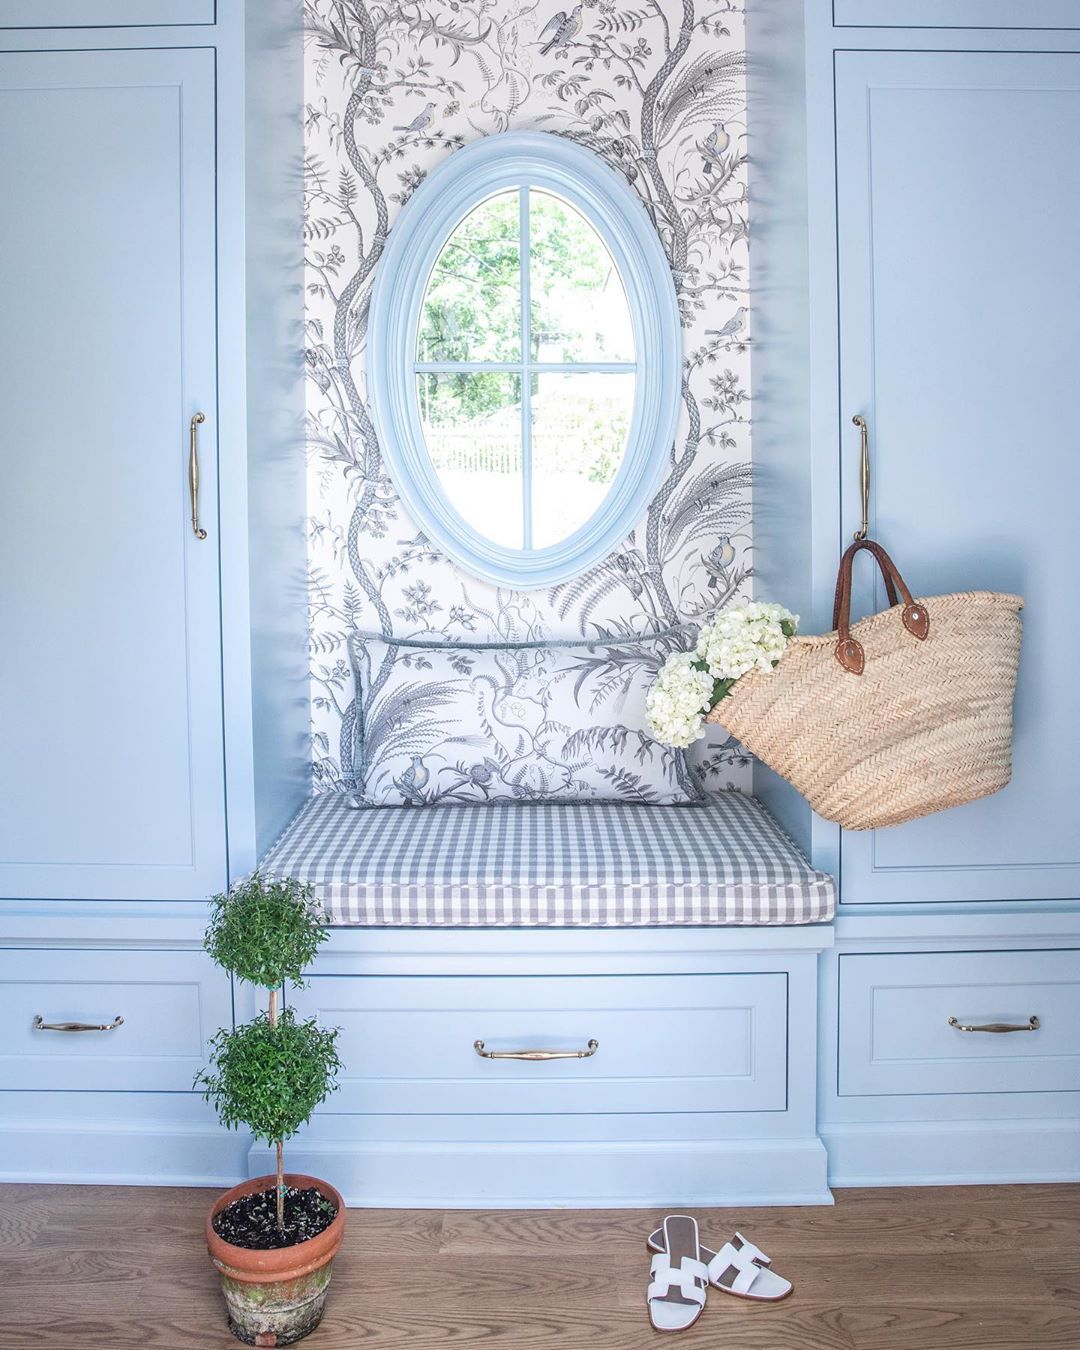 White, Room, Blue, Furniture, Interior design, Mirror, Window, Chest of drawers, Table, Tile, 